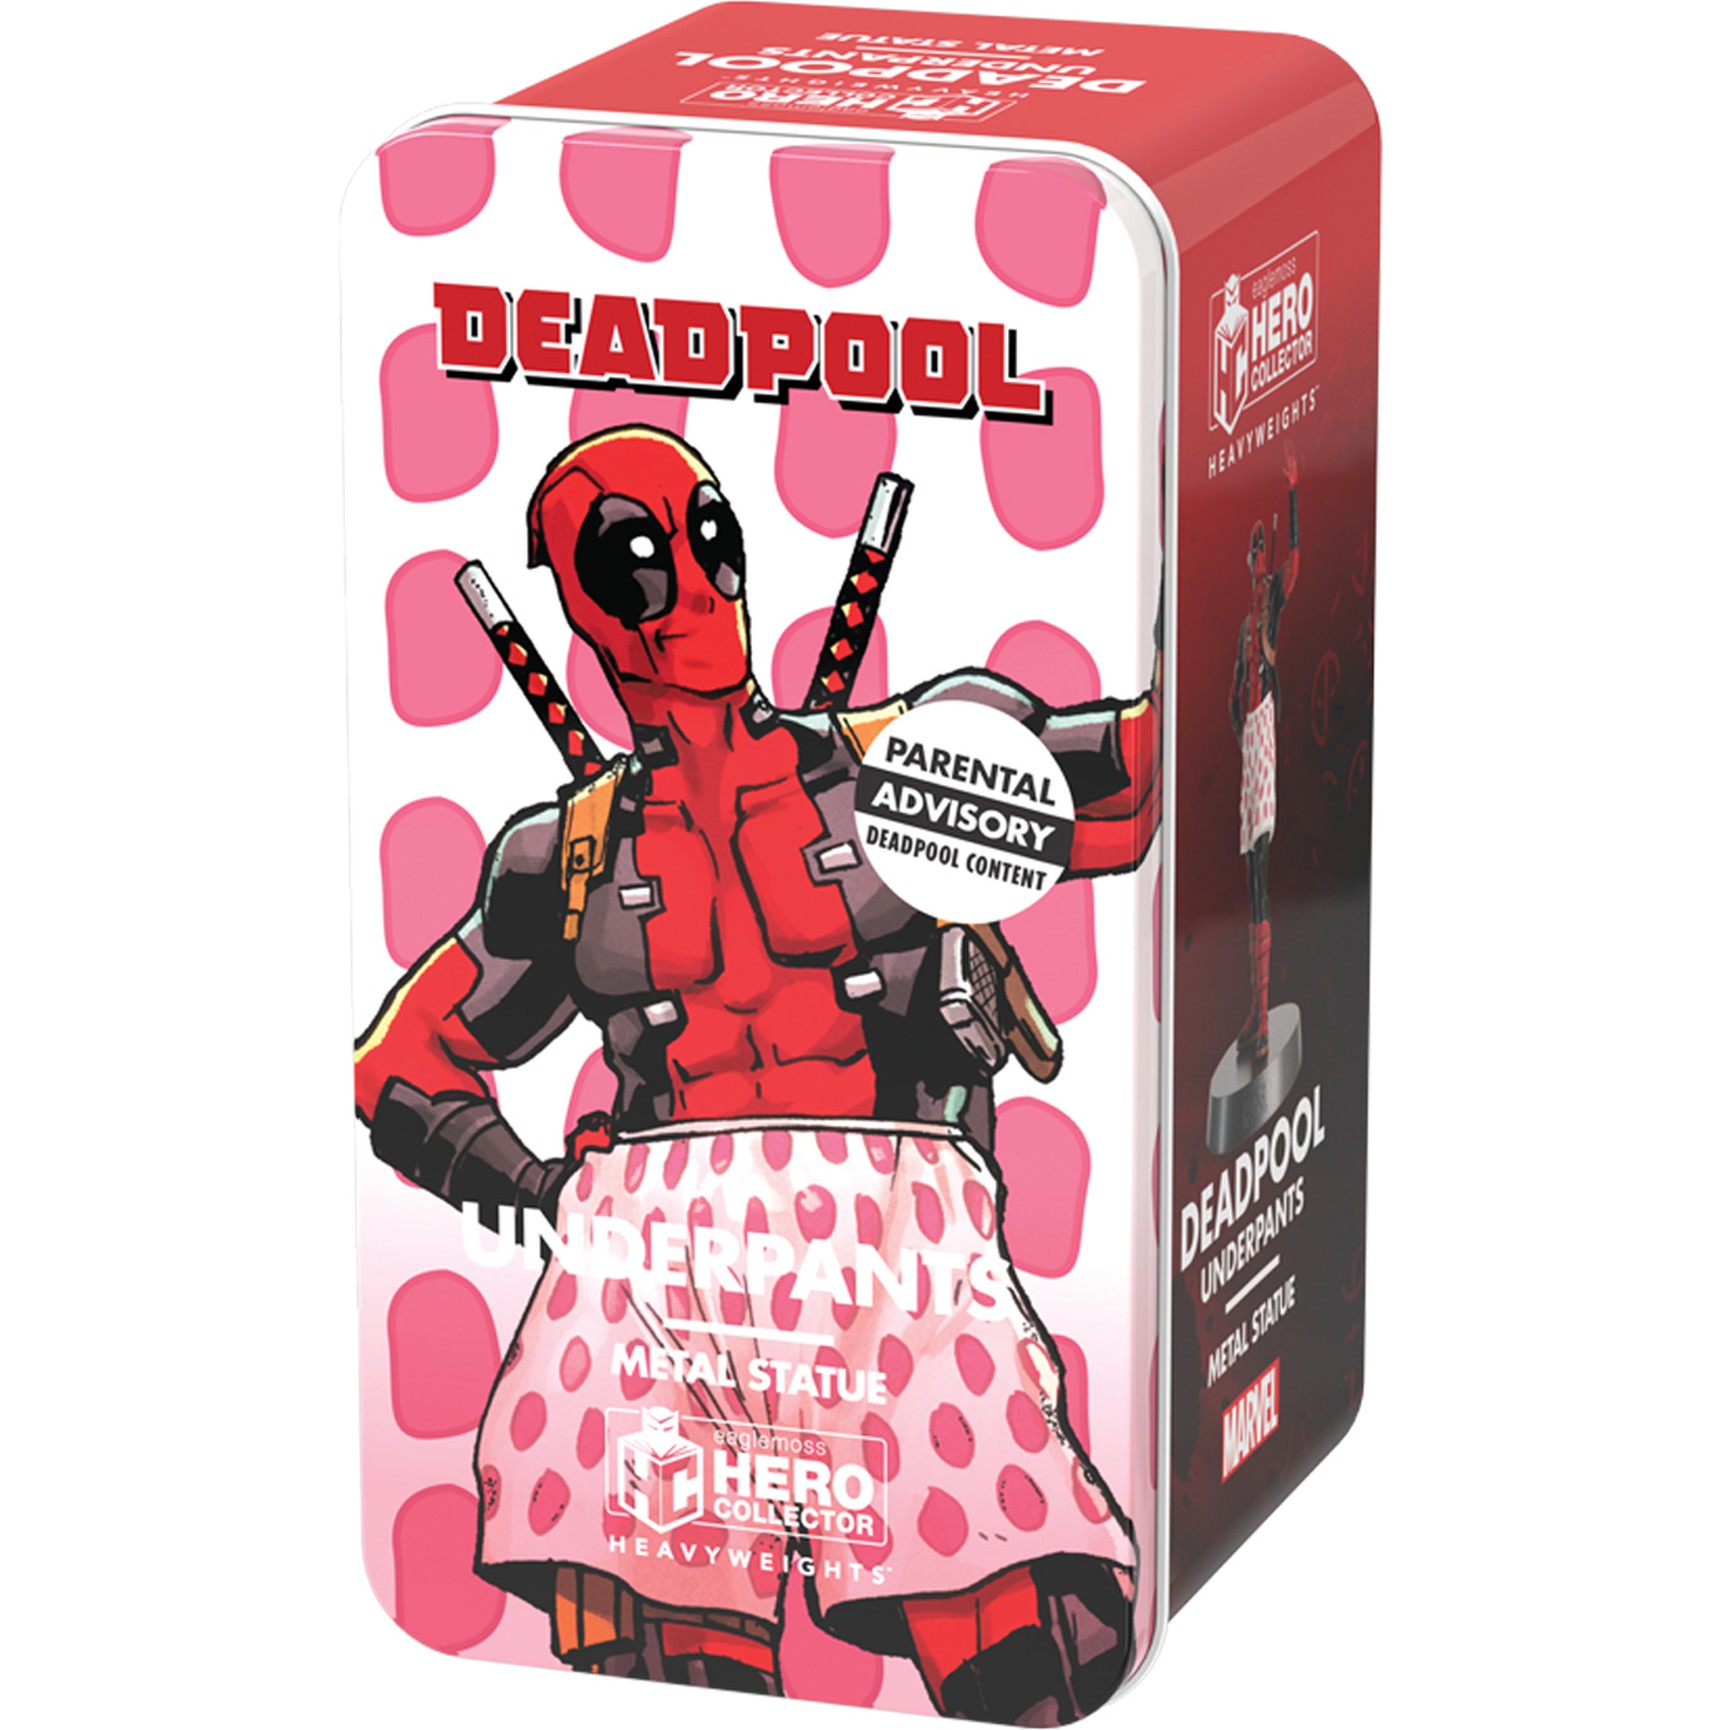 Hwden004_deadpoolunderpants_frontbox